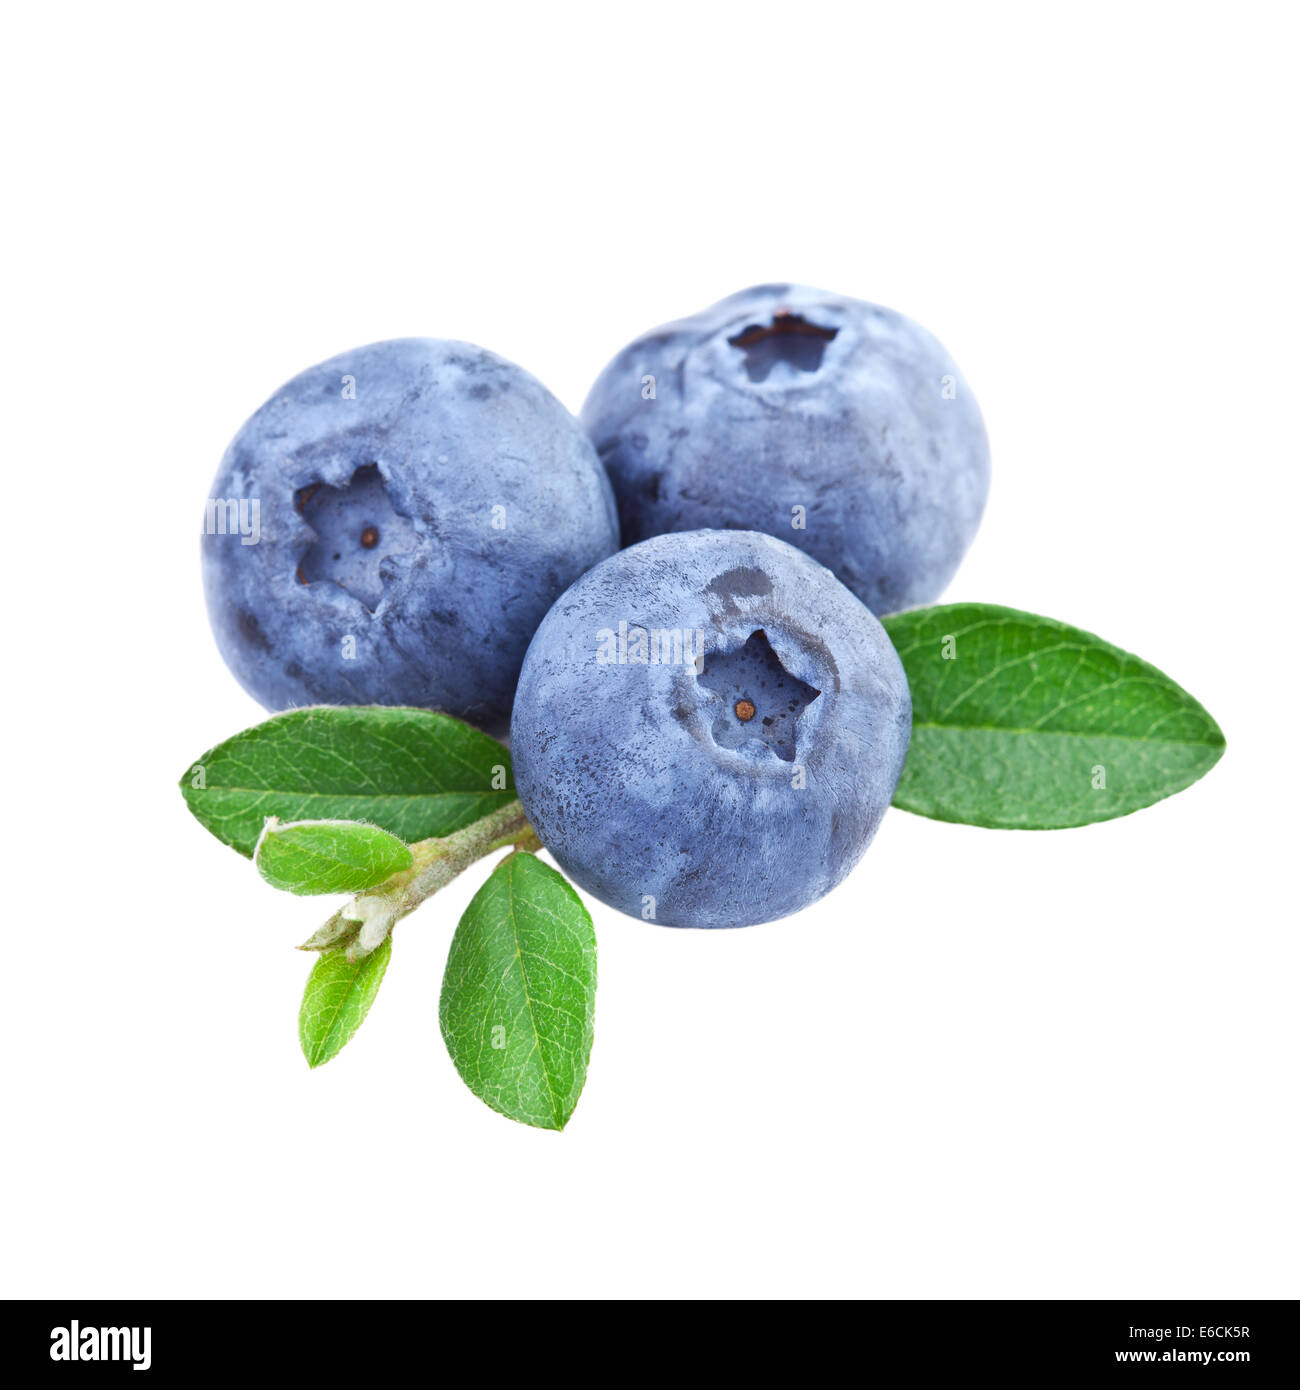 Blueberries in close up Stock Photo